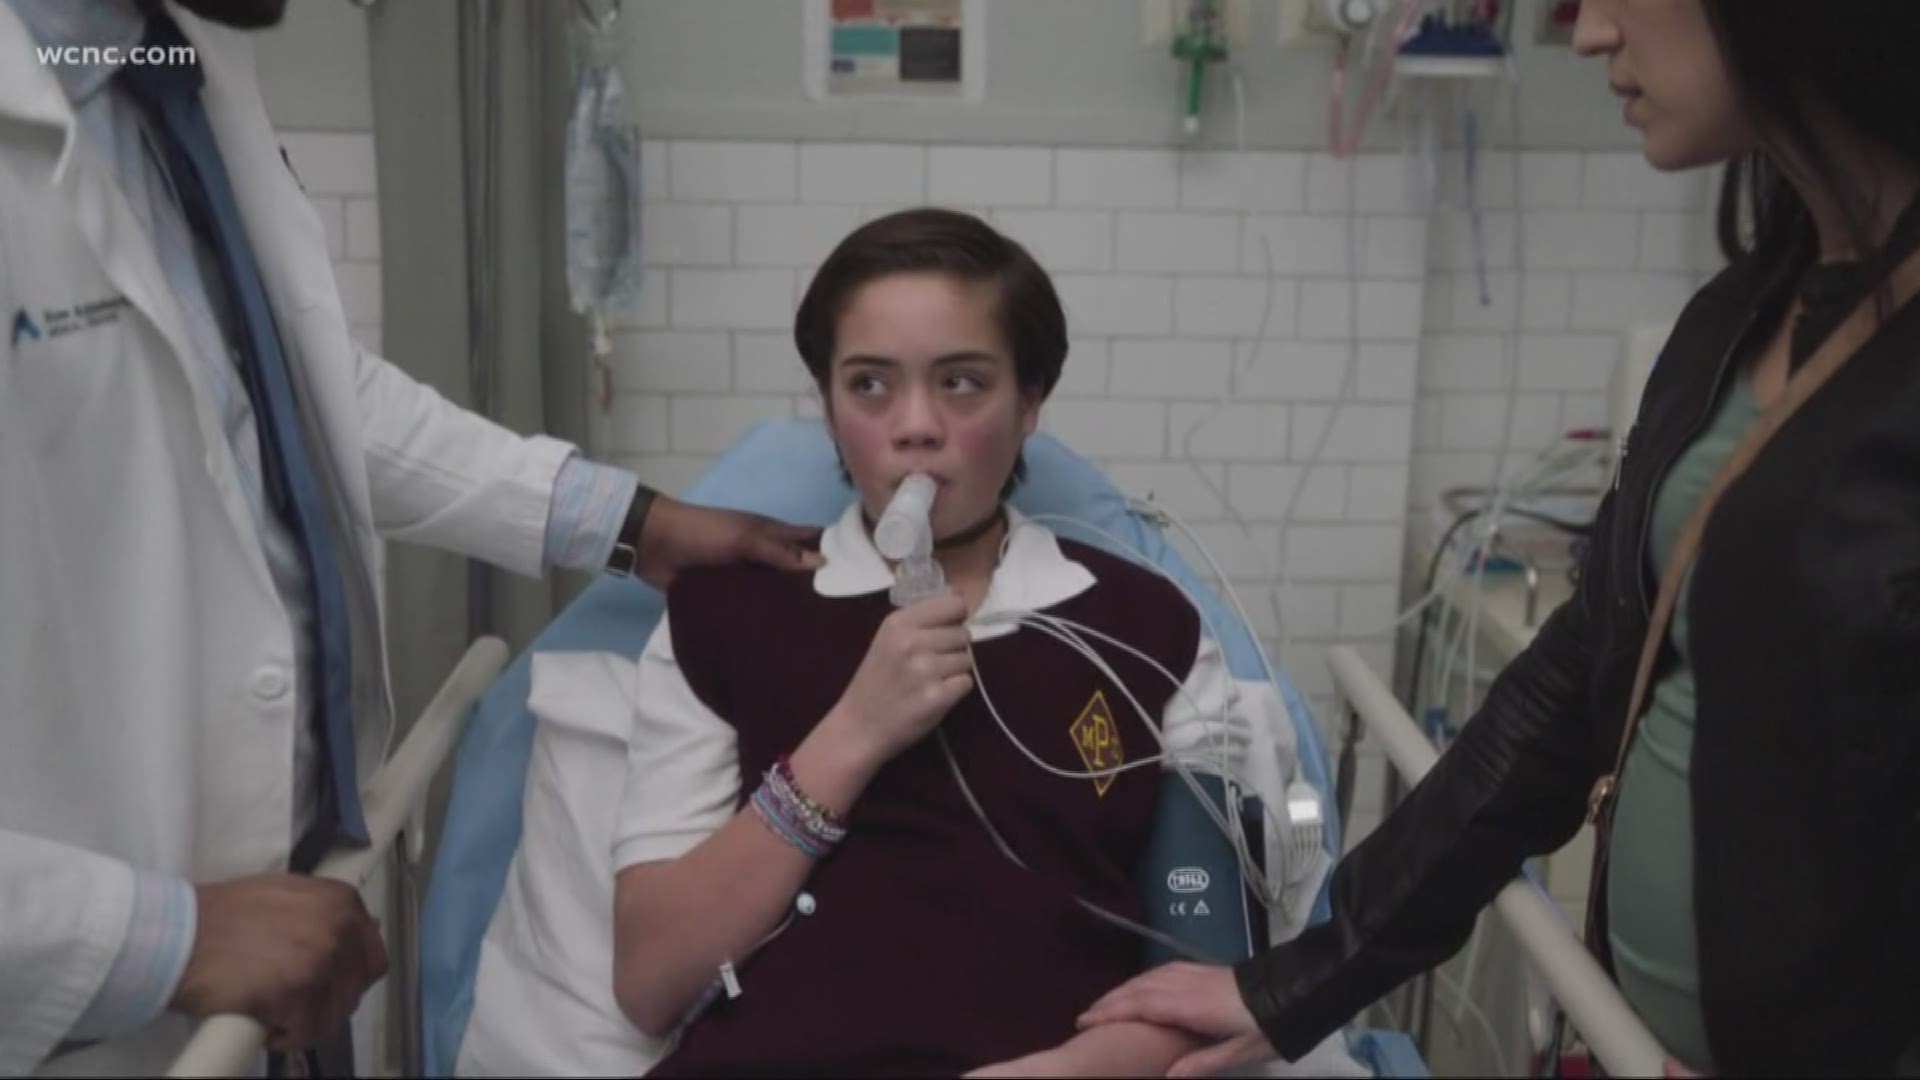 13-year-old Lily Knowles is from Waxhaw, and Tuesday she's portraying a patient with cystic fibrosis, which she has in real life.